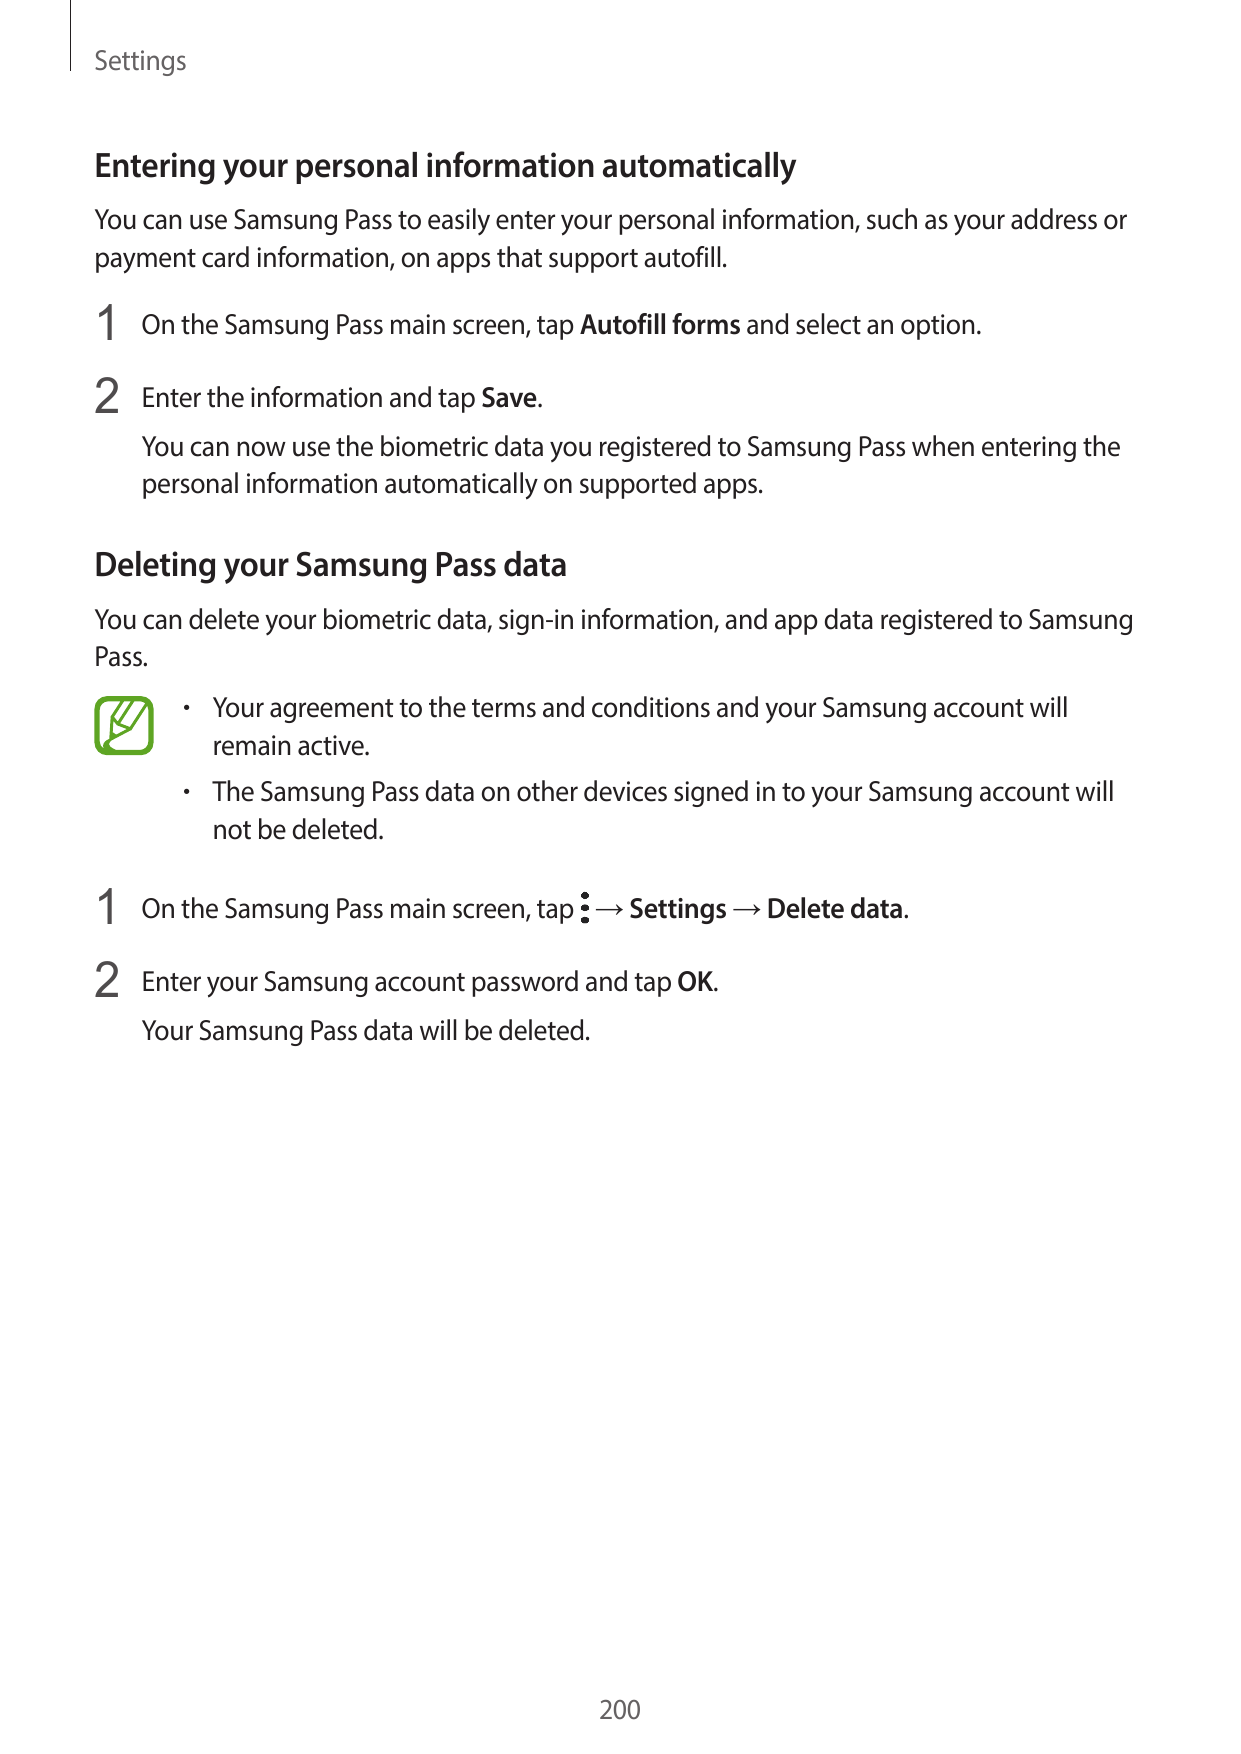 SettingsEntering your personal information automaticallyYou can use Samsung Pass to easily enter your personal information, such